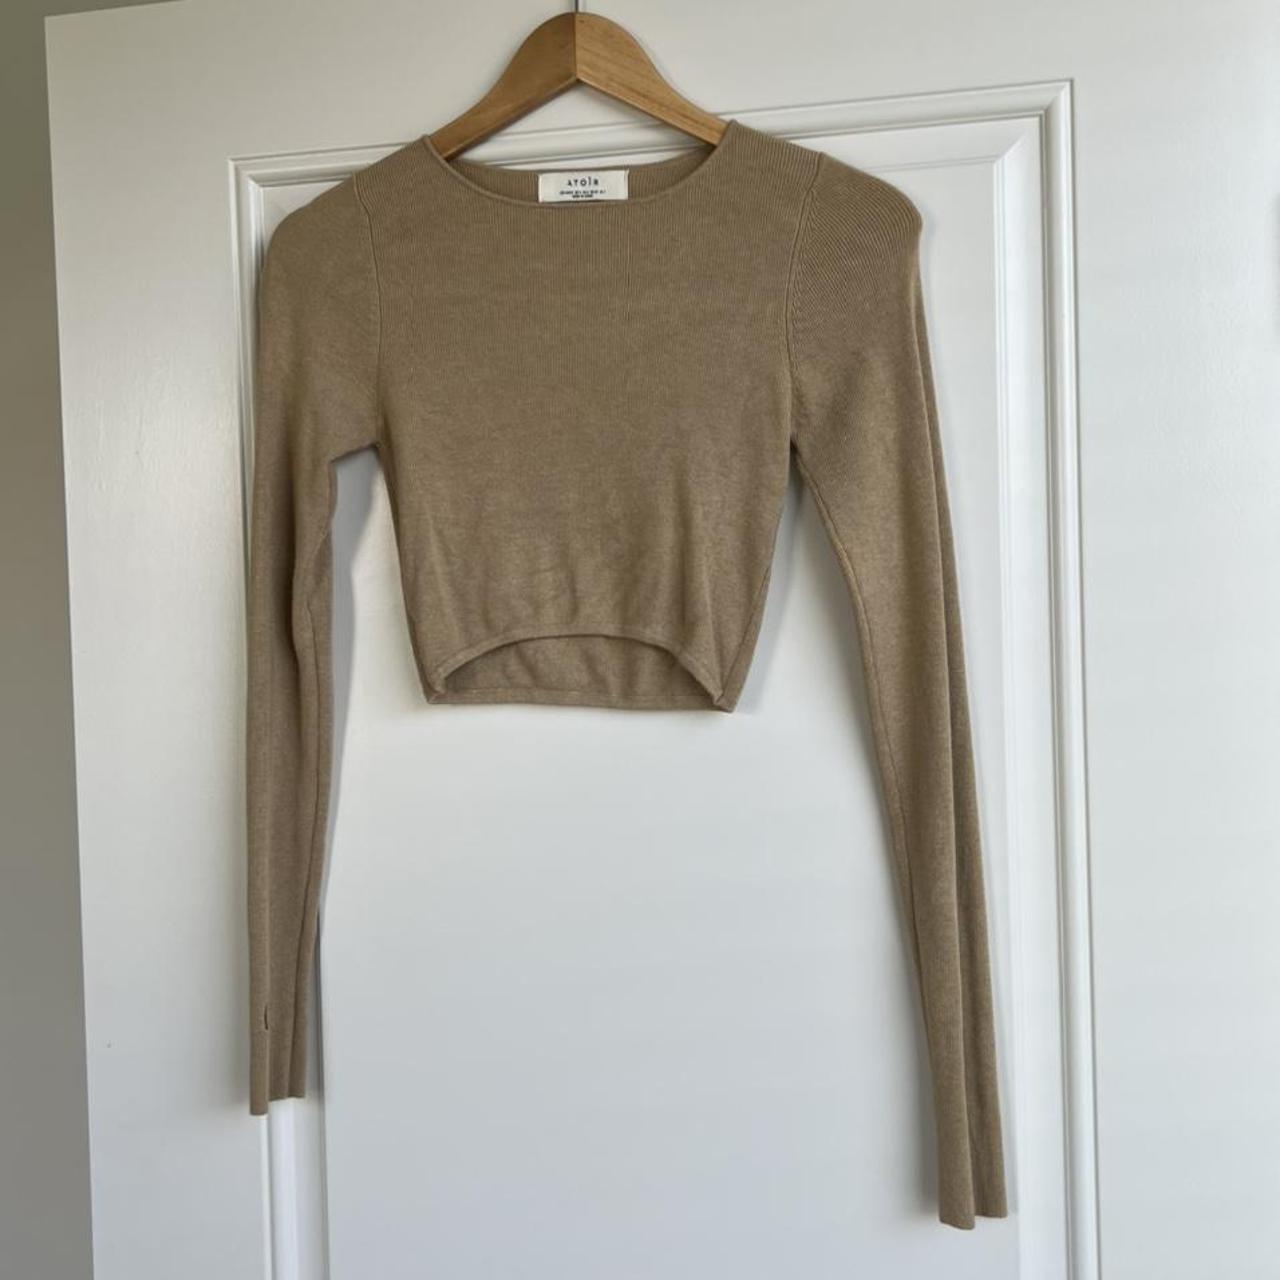 Product Image 2 - BEIGE KNIT TOP

• Size S